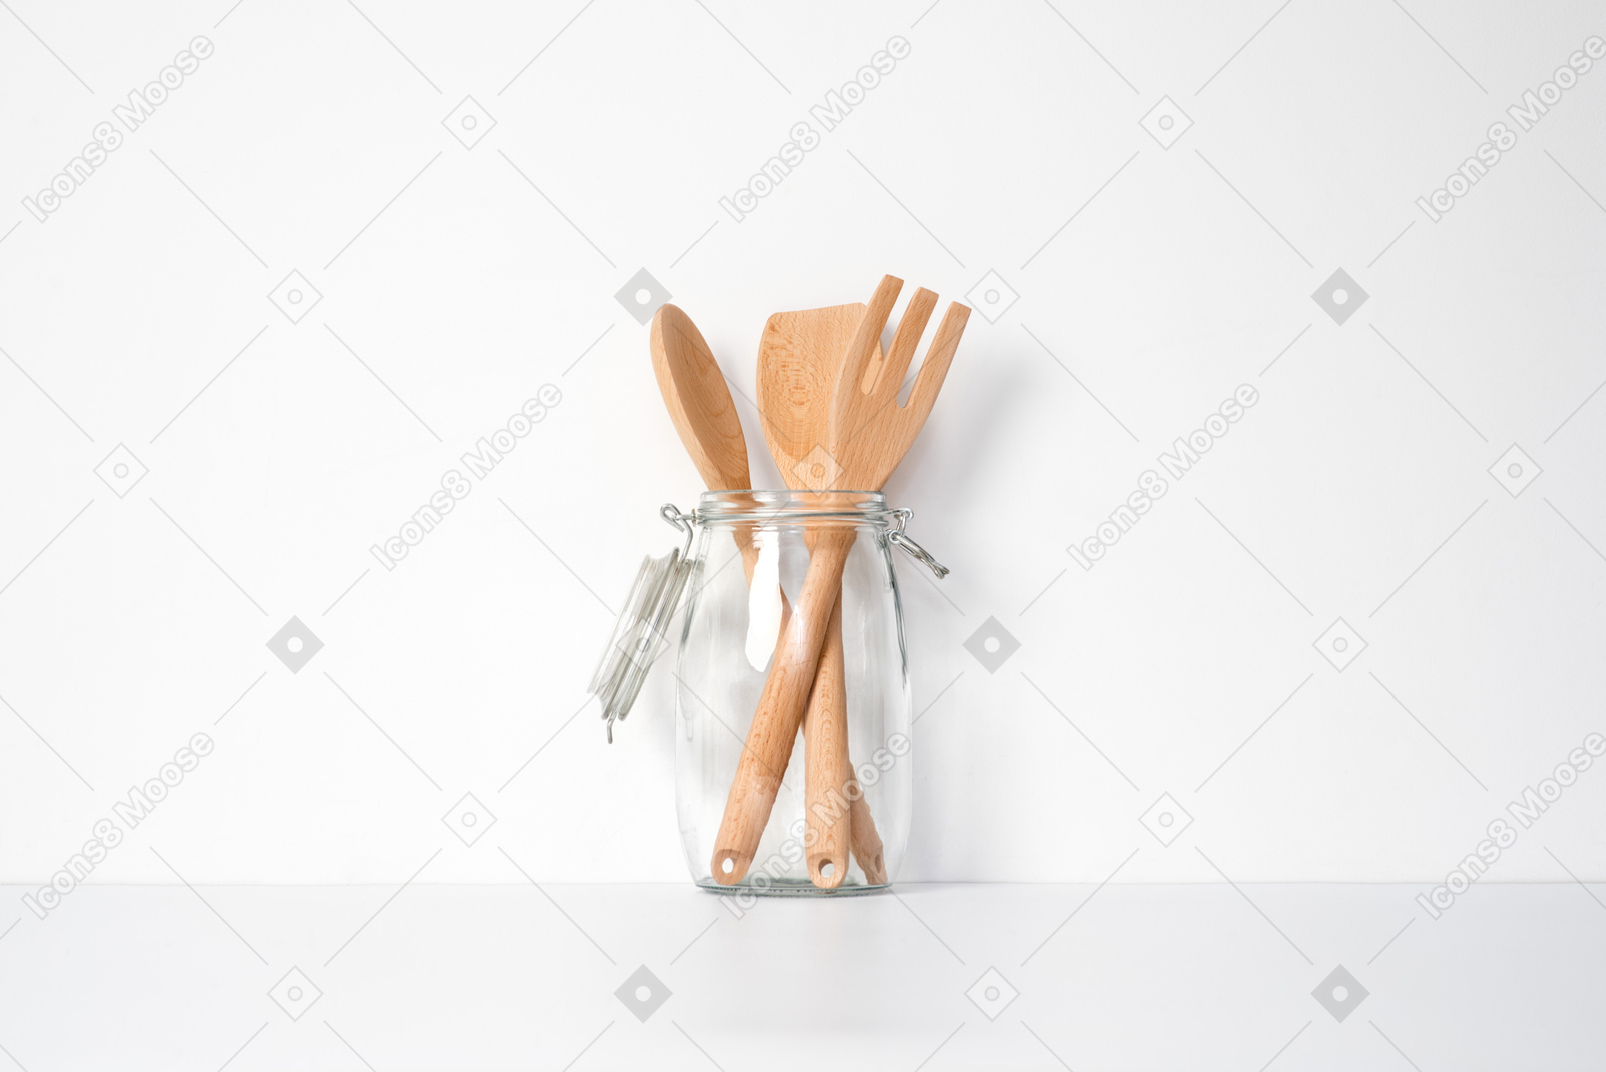 Country kitchenware